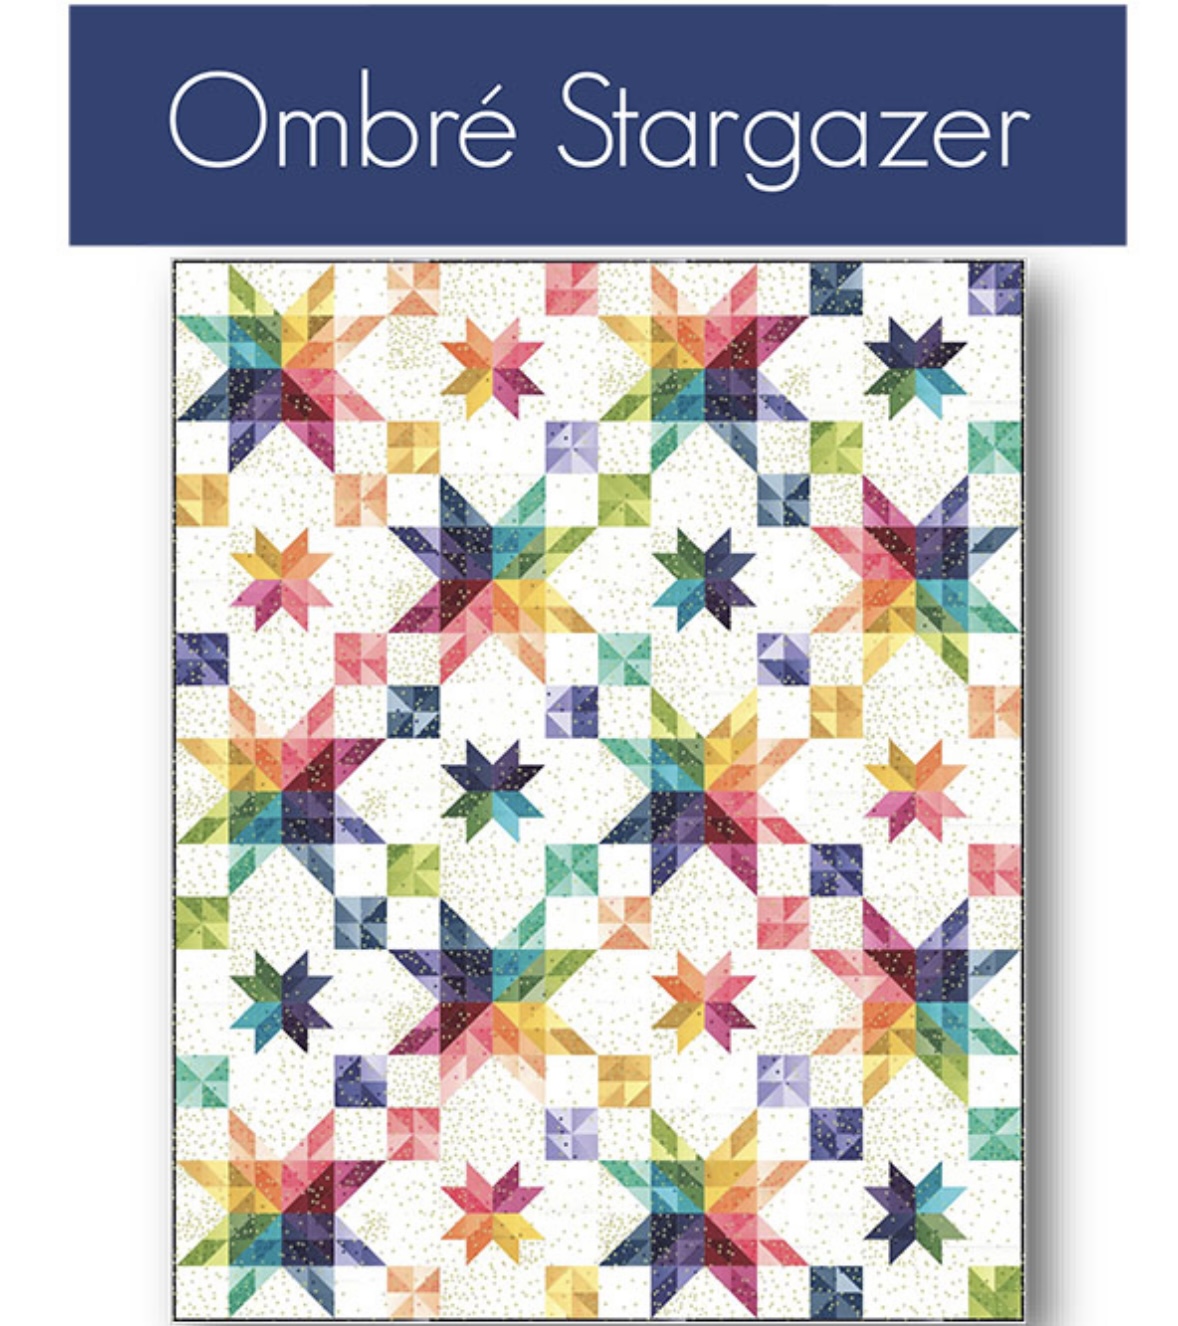 Co – Fabrics Moda Pattern Quilt Quilt – Jubilee Ombre V Stargazer Company – and